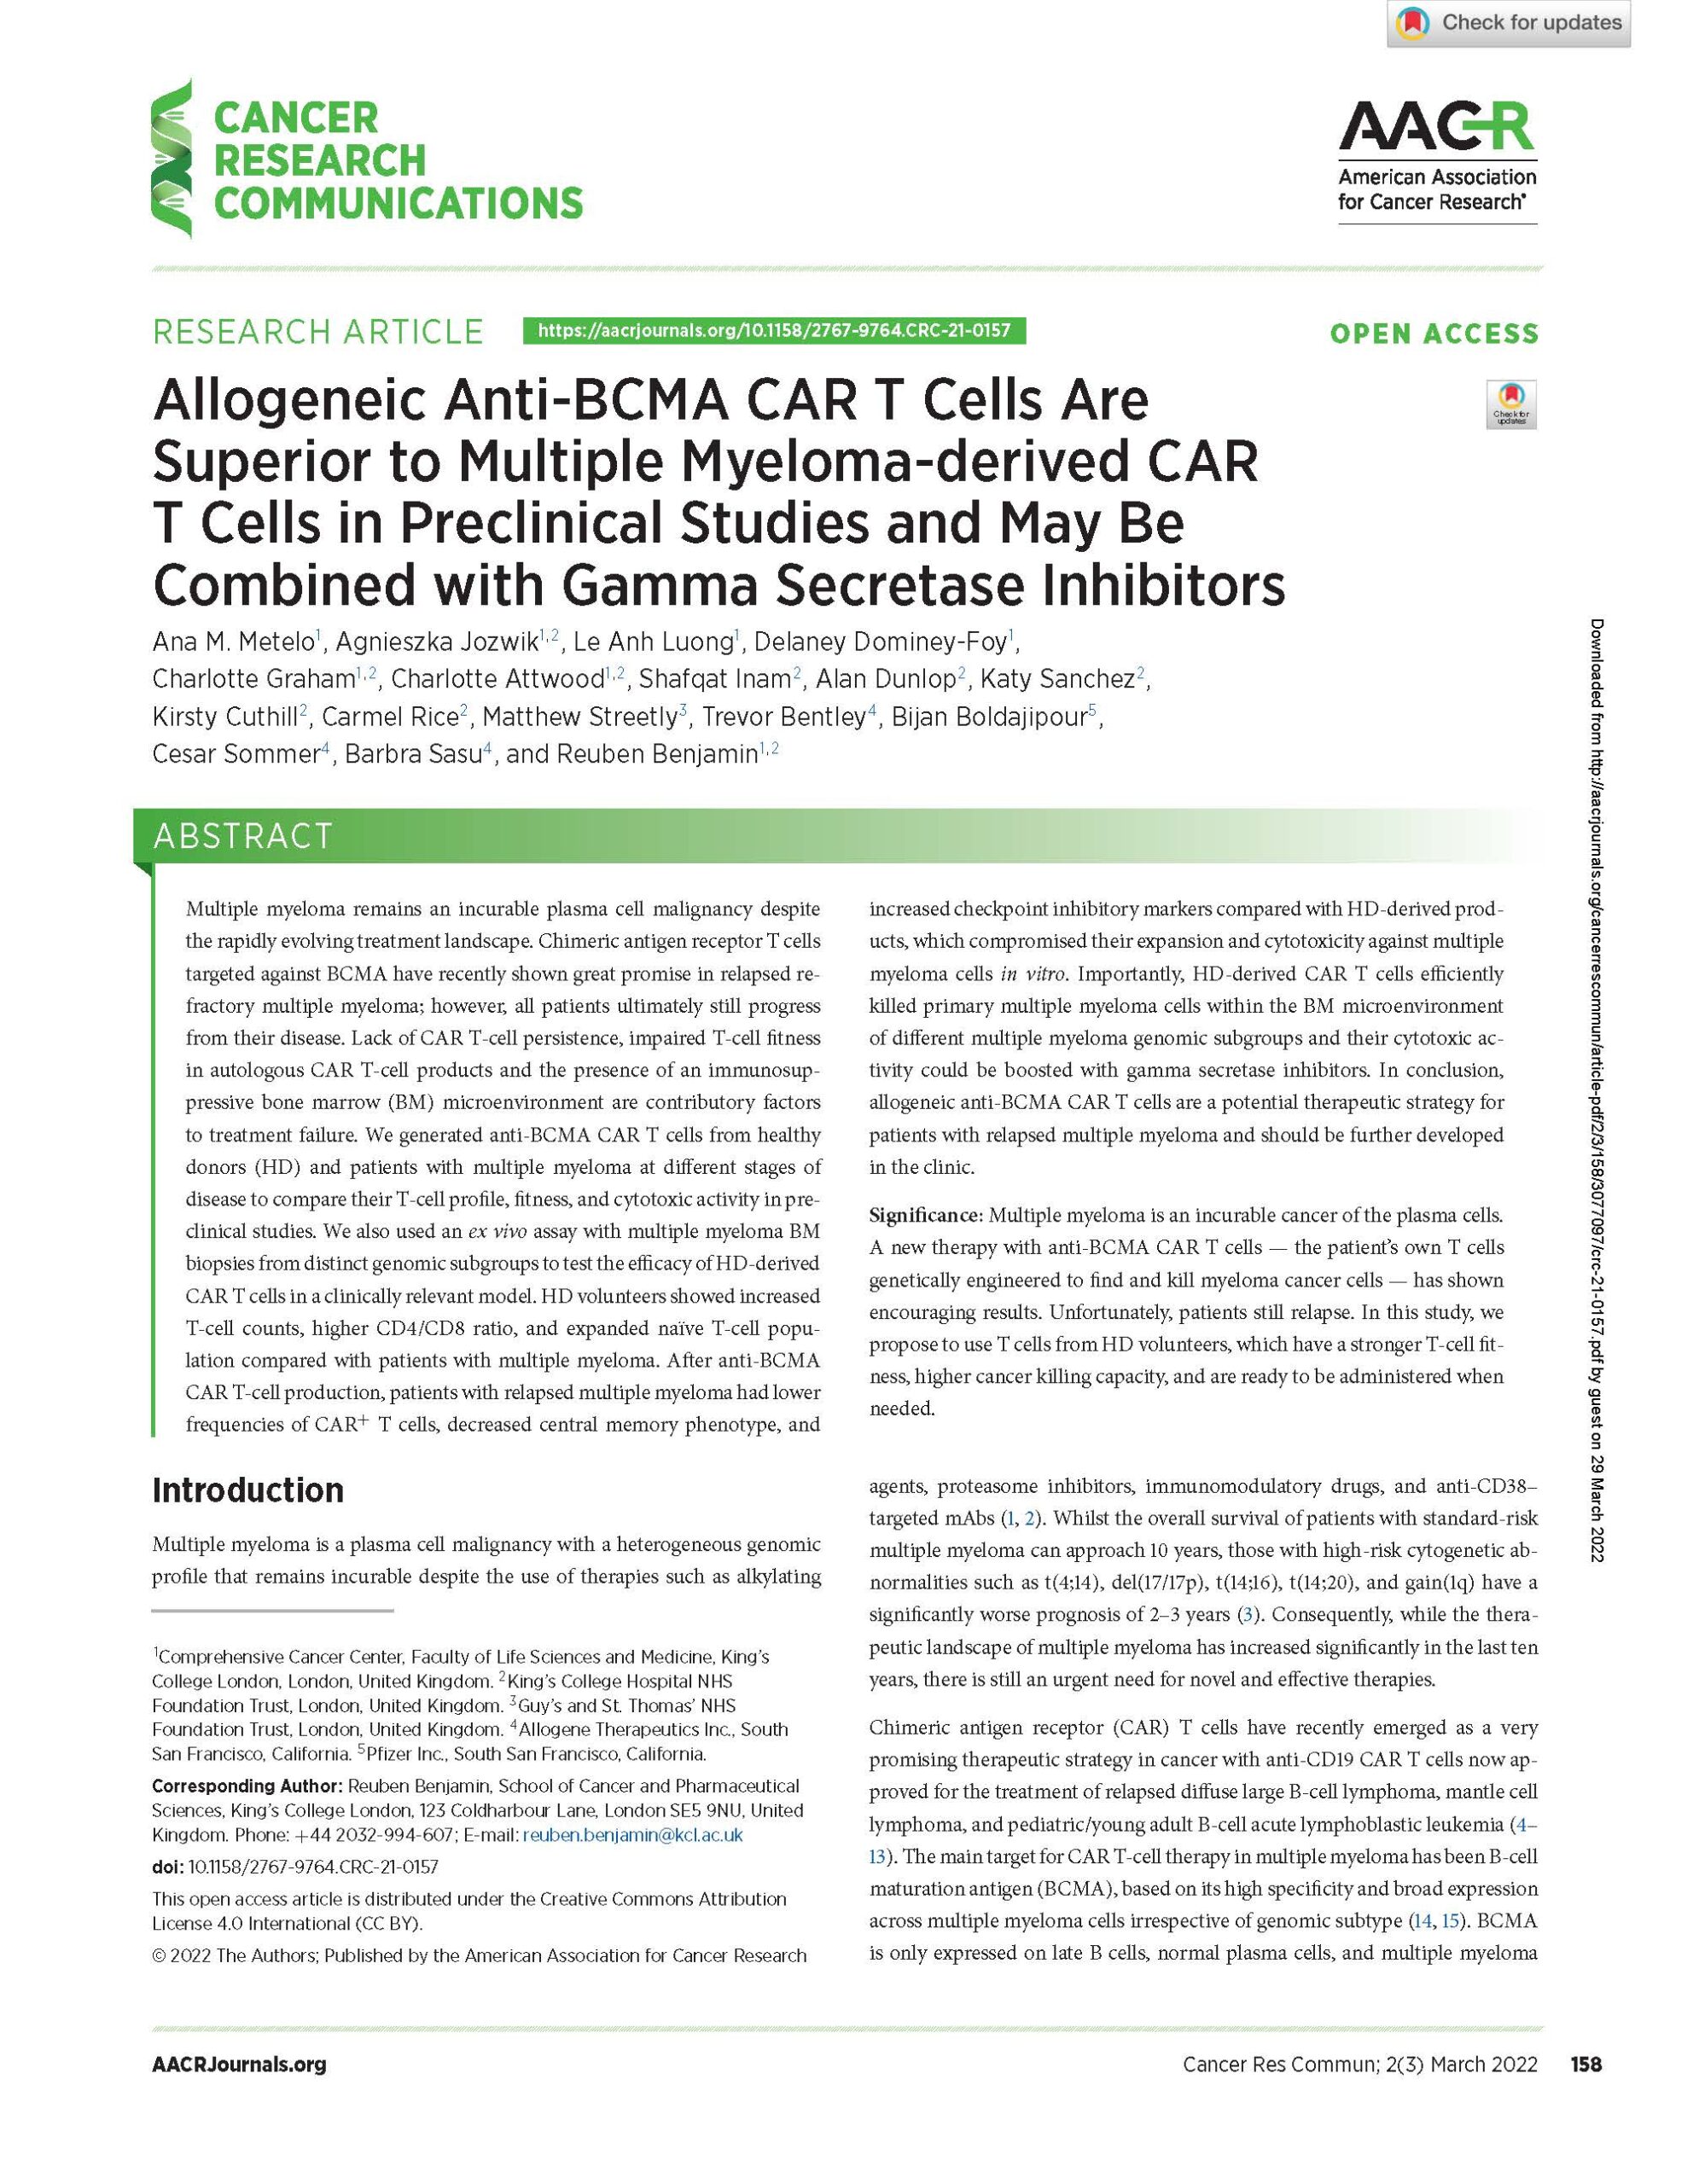 Read more about the article Allogeneic Anti-BCMA CAR T Cells Are Superior to Multiple Myeloma-derived CAR T Cells in Preclinical Studies and May Be Combined with Gamma Secretase Inhibitors